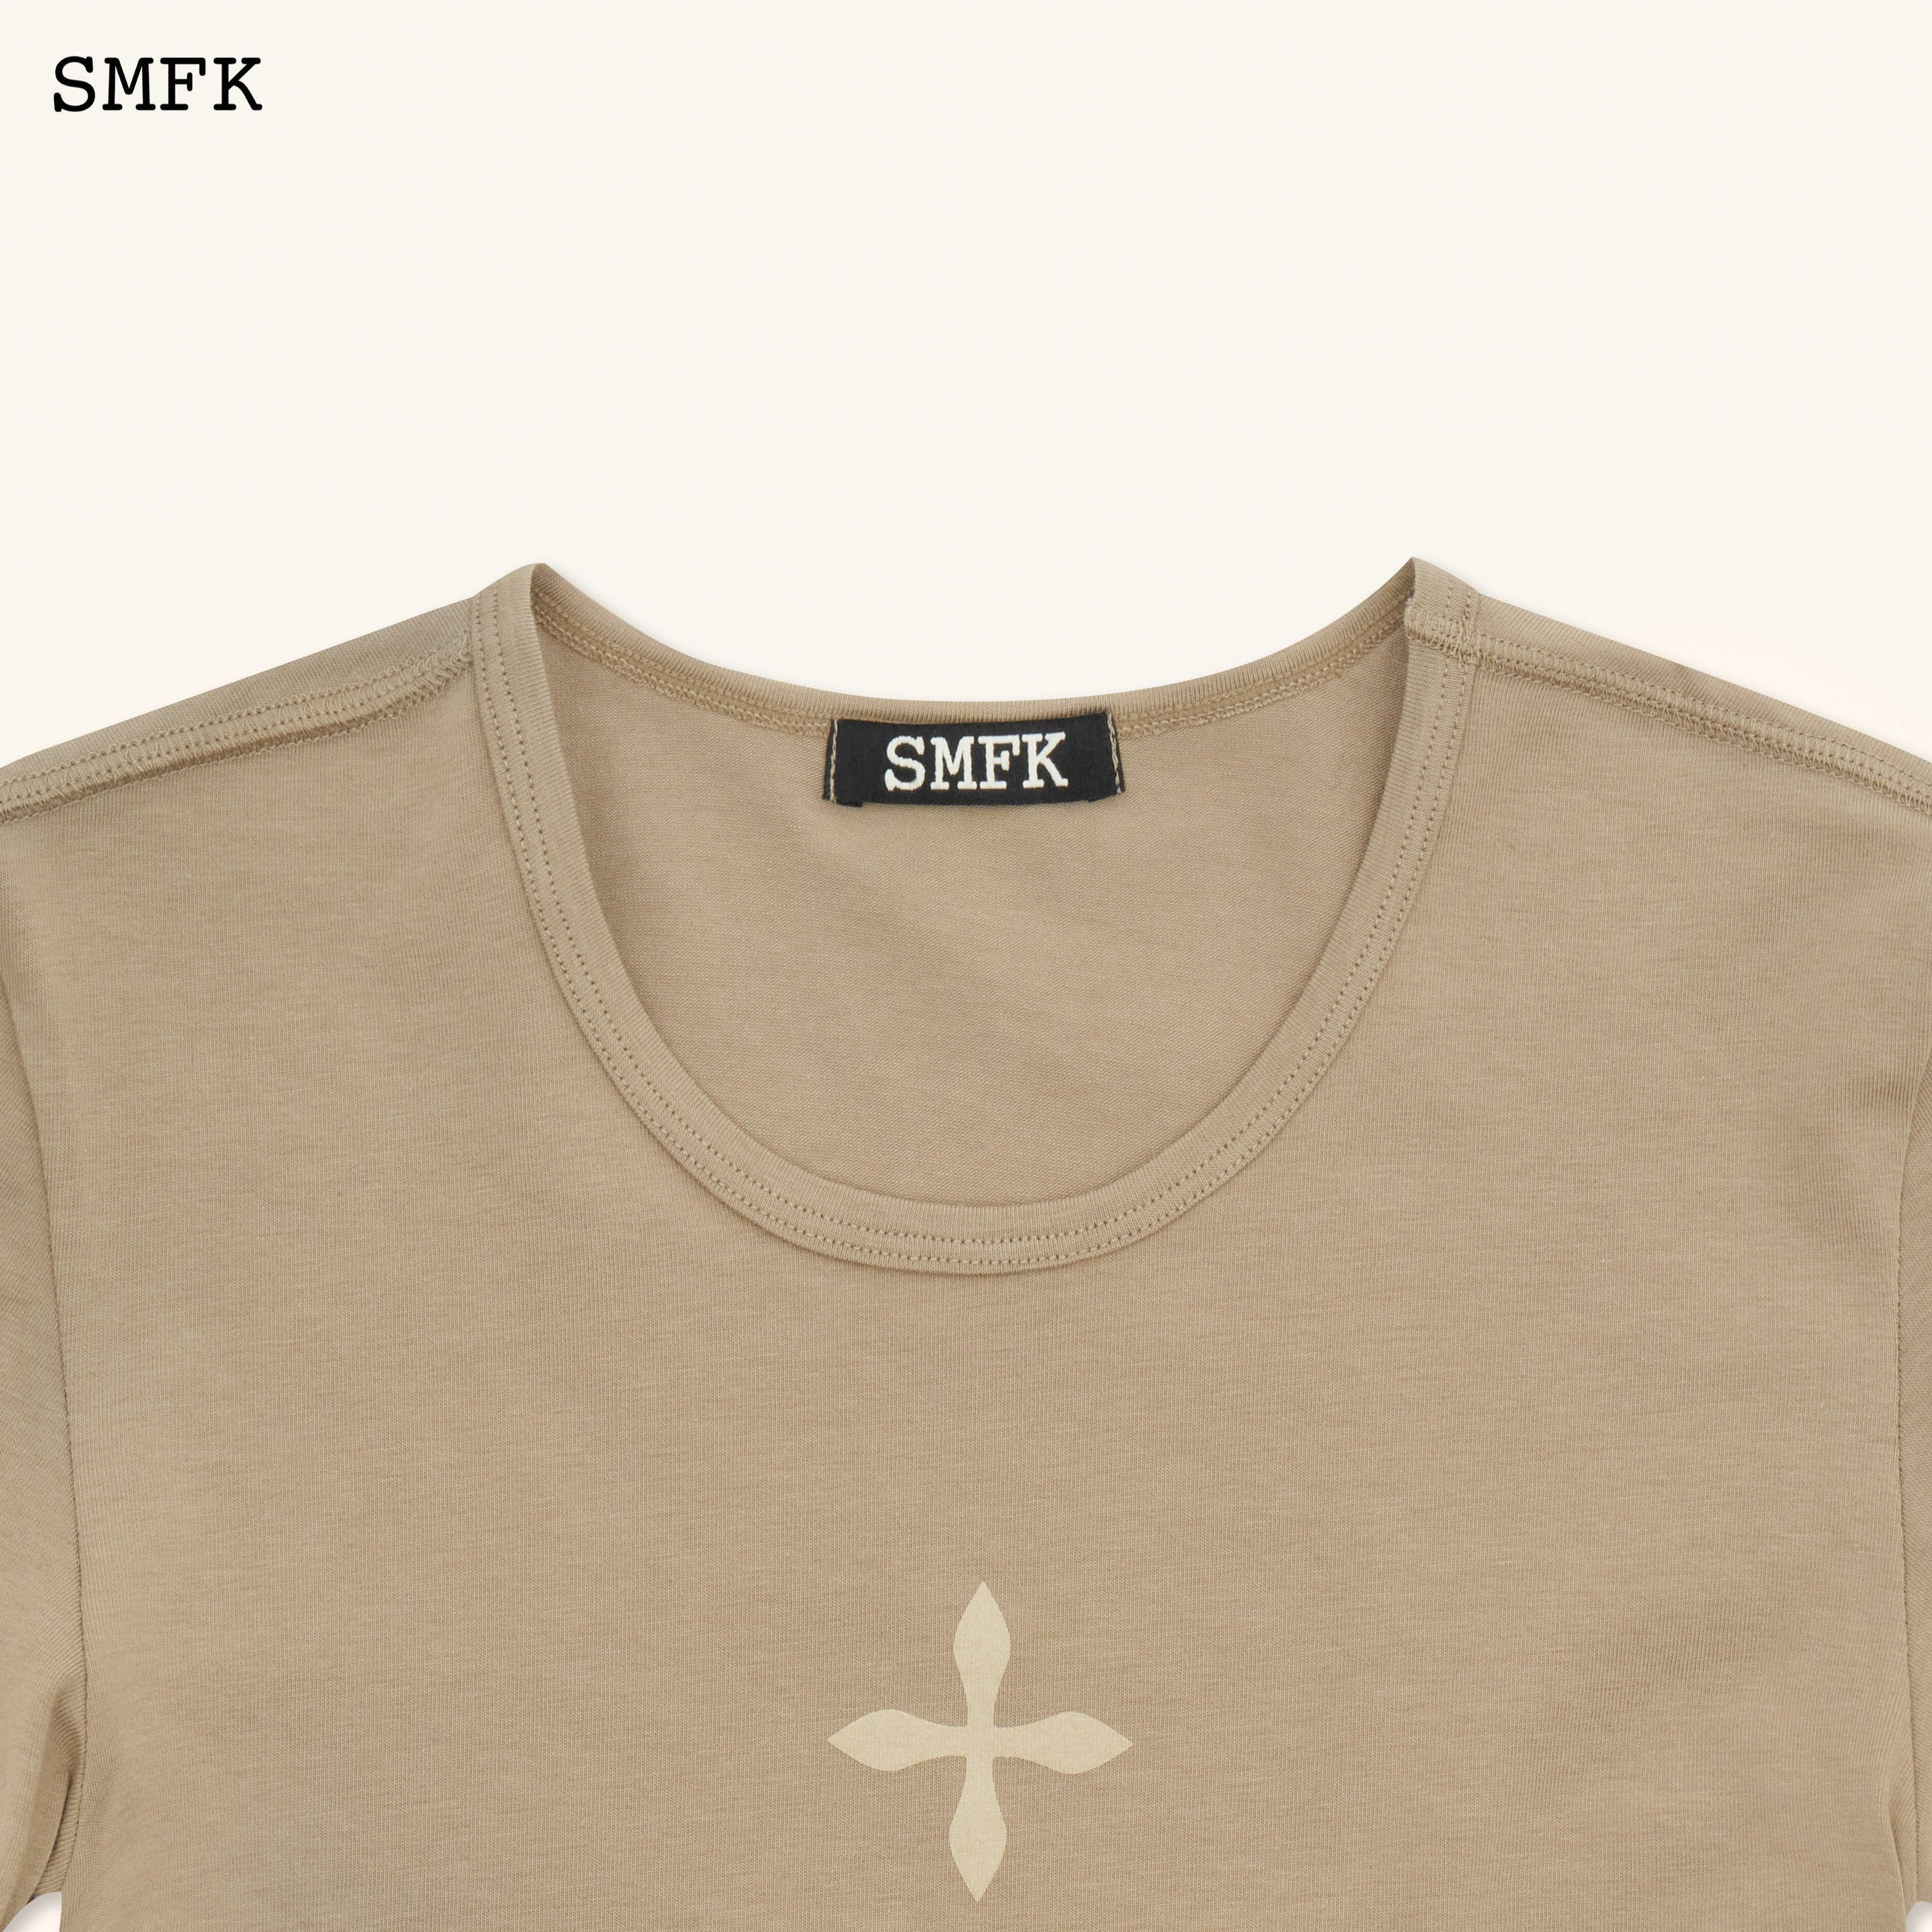 Compass Cross Classic Sporty Tights Tee In Khaki - SMFK Official